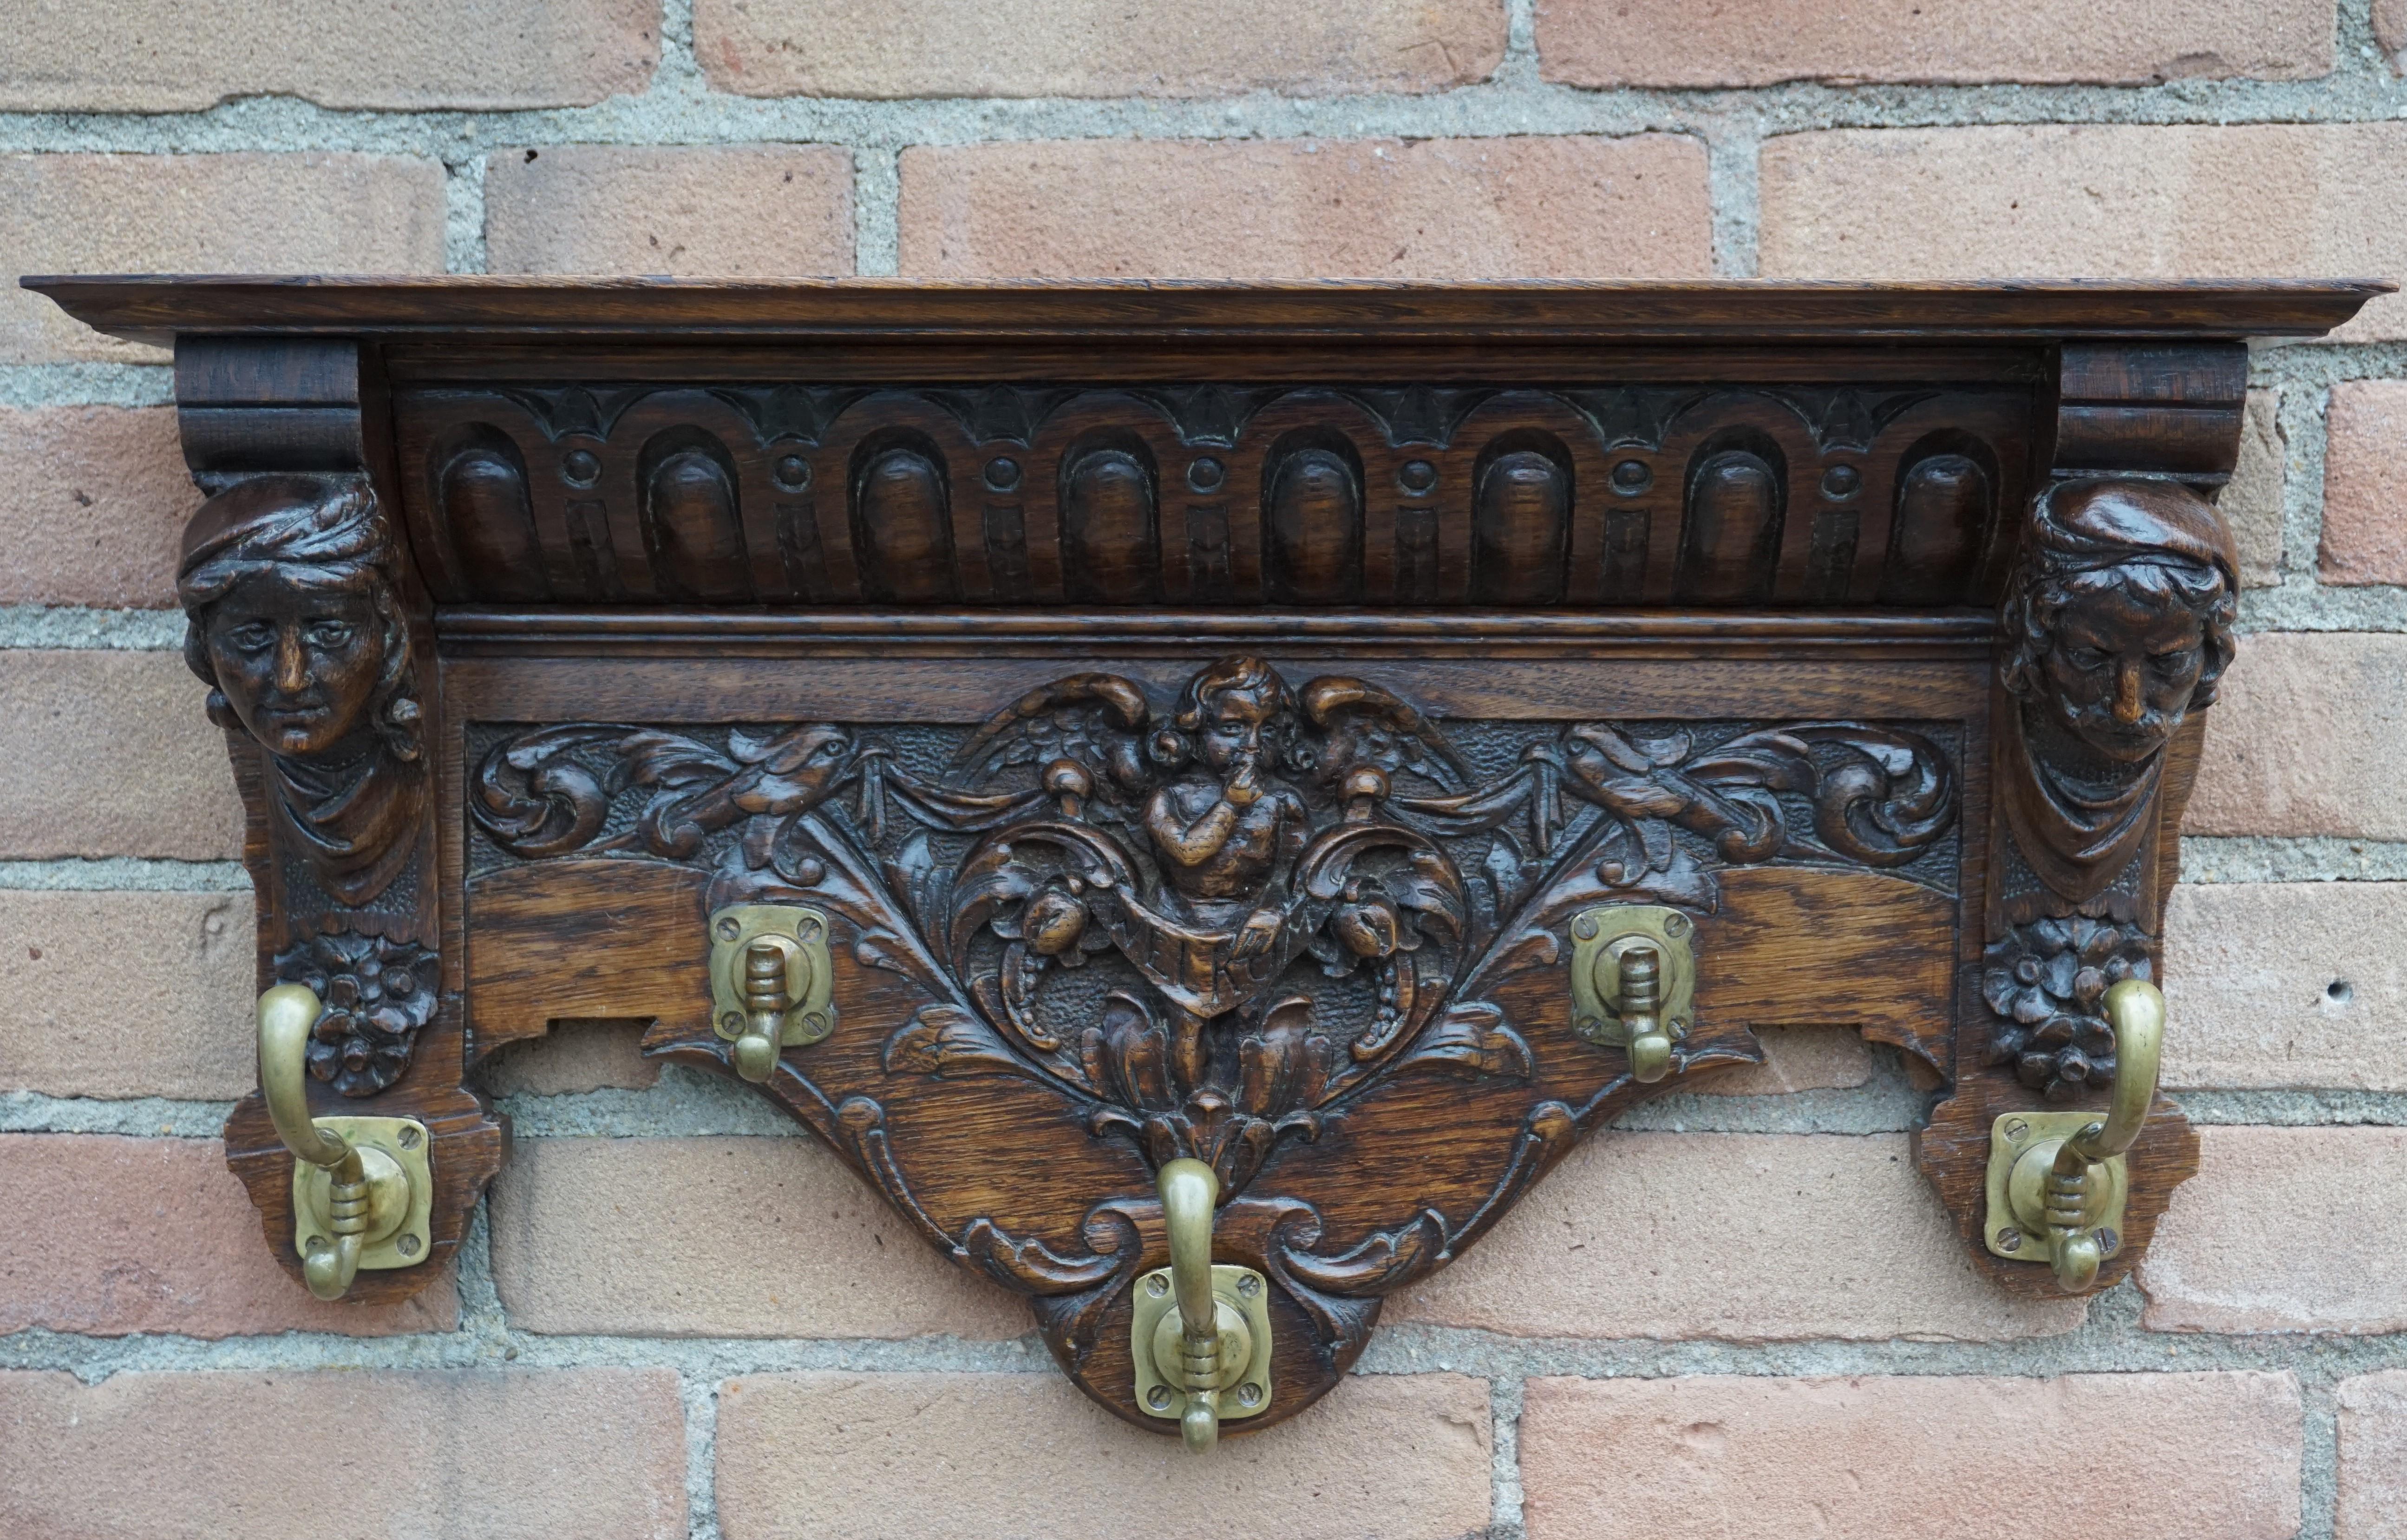 Unuasally small and extremely sculptural coat rack.

This antique Dutch coat rack is special and highly collectibe for a number of reasons. First of all, it is very well carved and with great depth. Secondly, we have never seen a 19th century coat